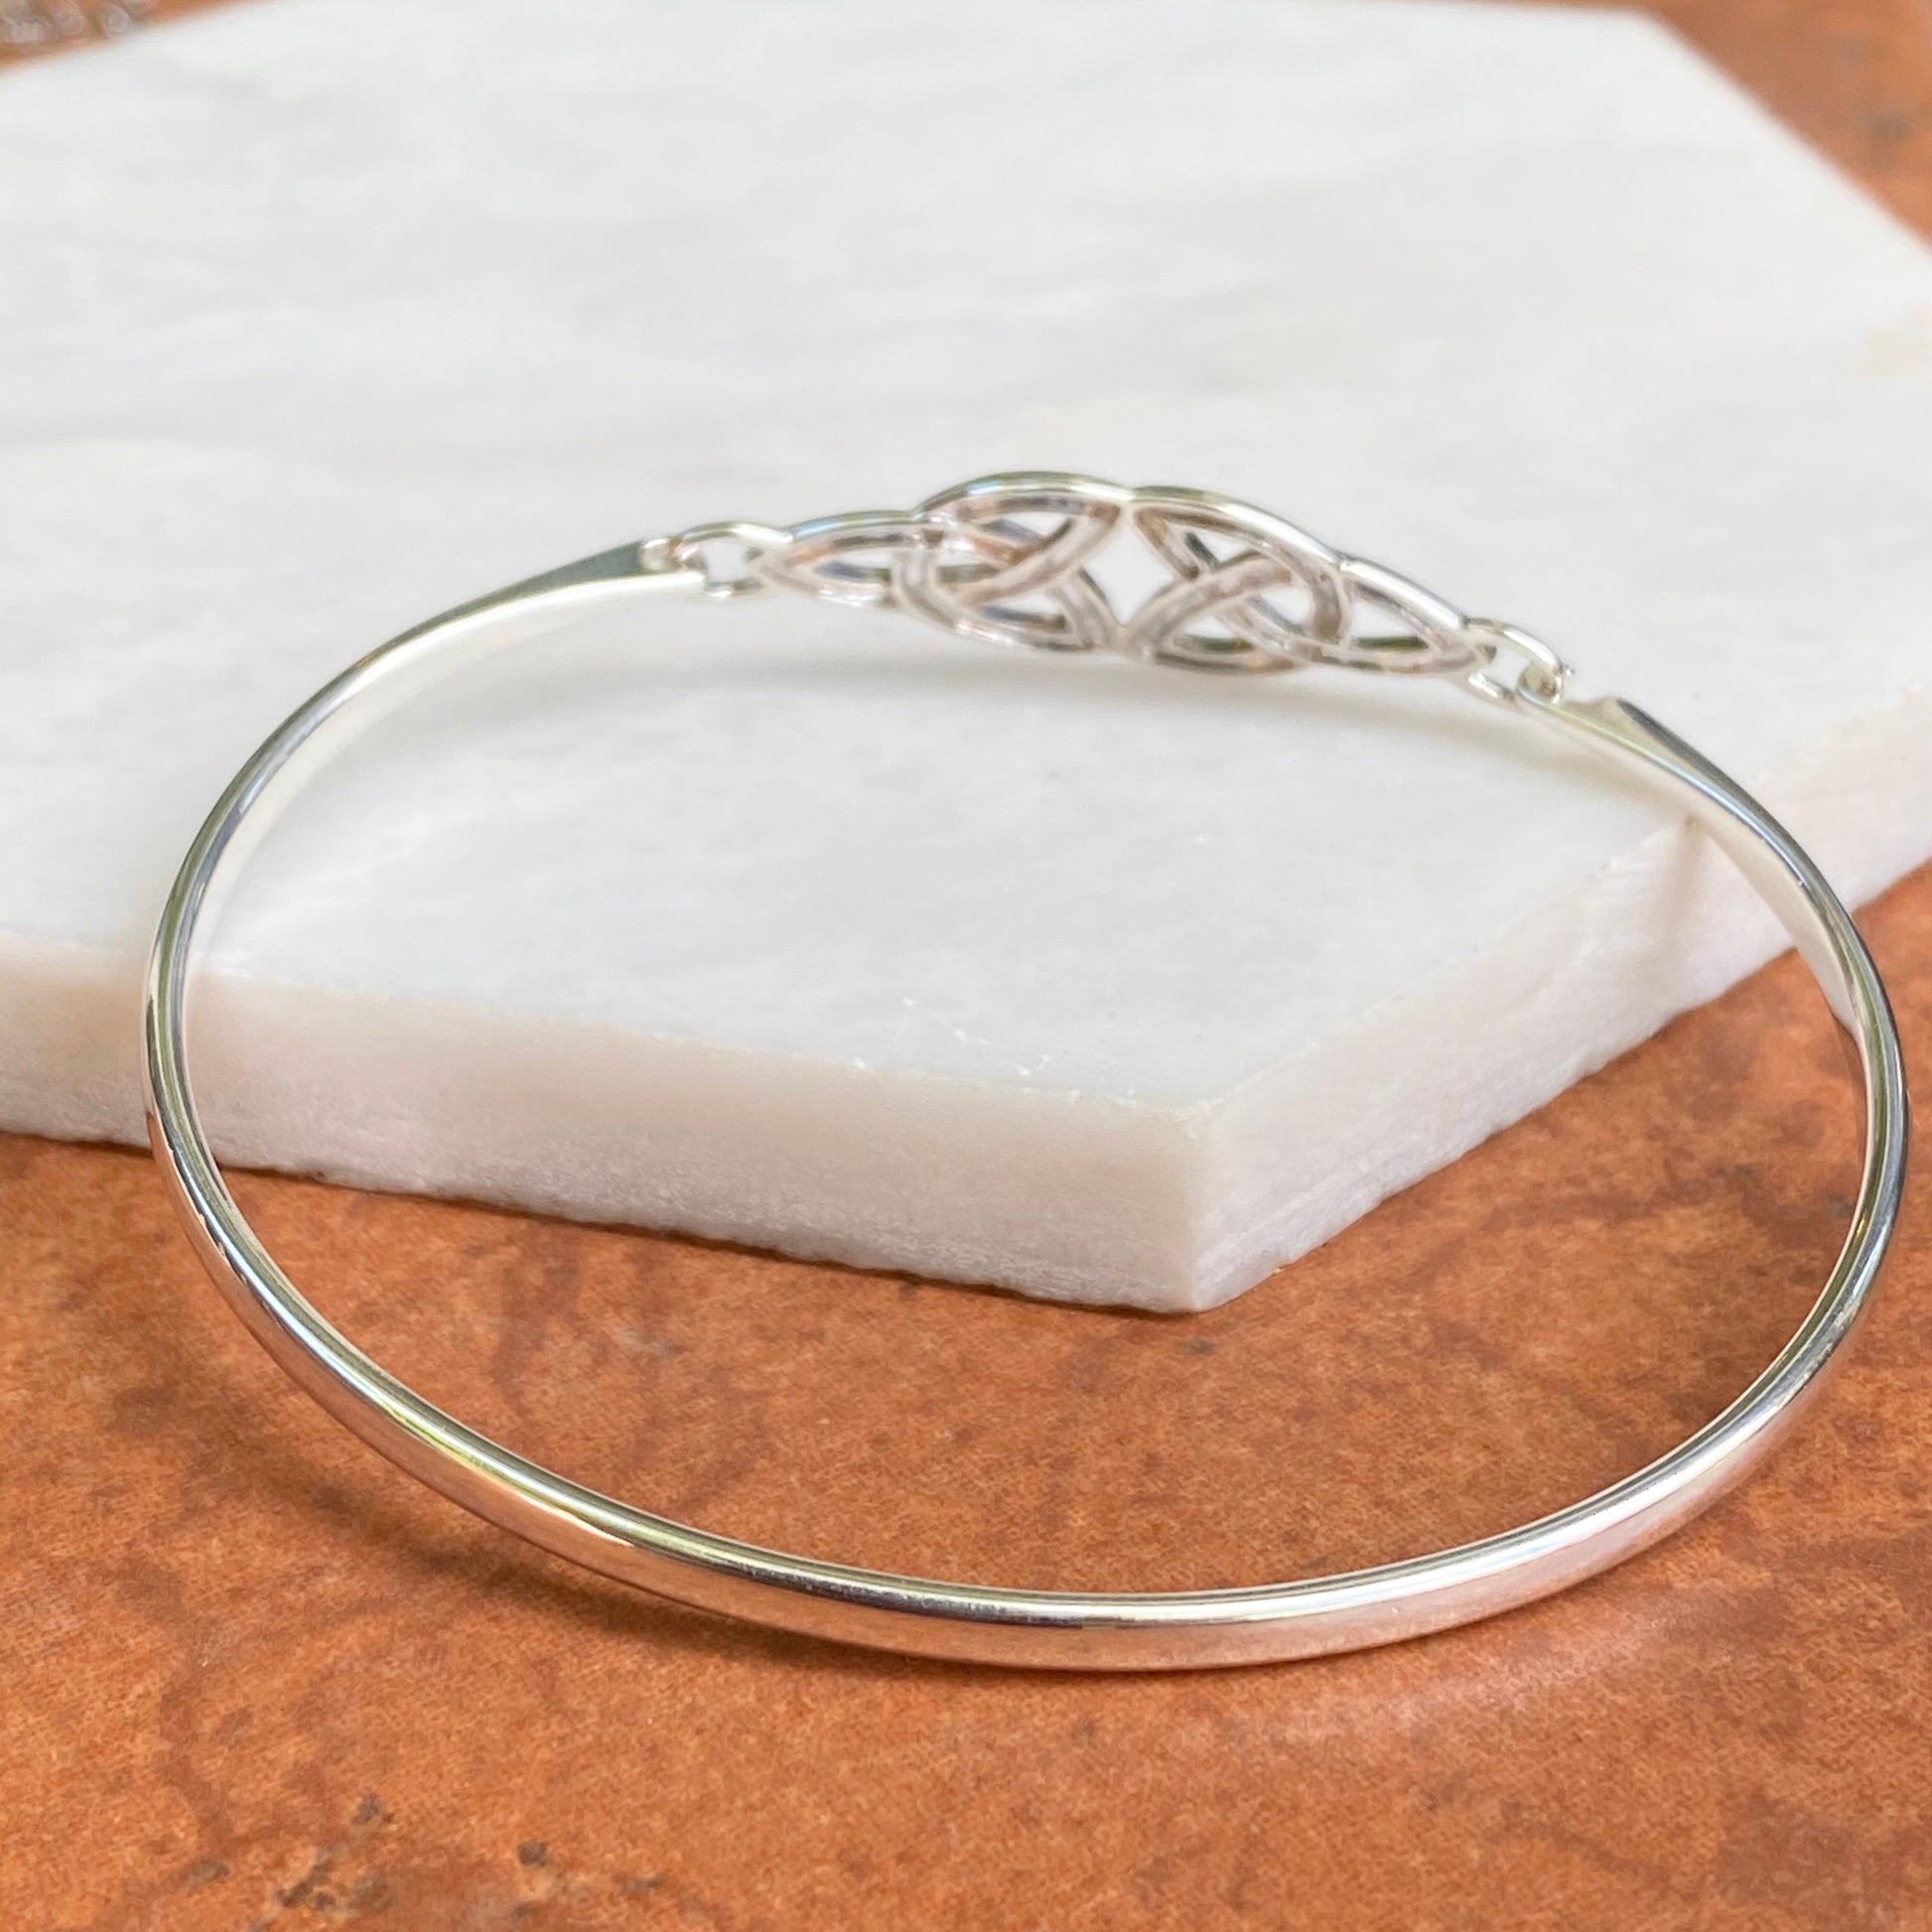 Sterling Silver Celtic Knot Thin Bangle Bracelet, Sterling Silver Celtic Knot Thin Bangle Bracelet - Legacy Saint Jewelry